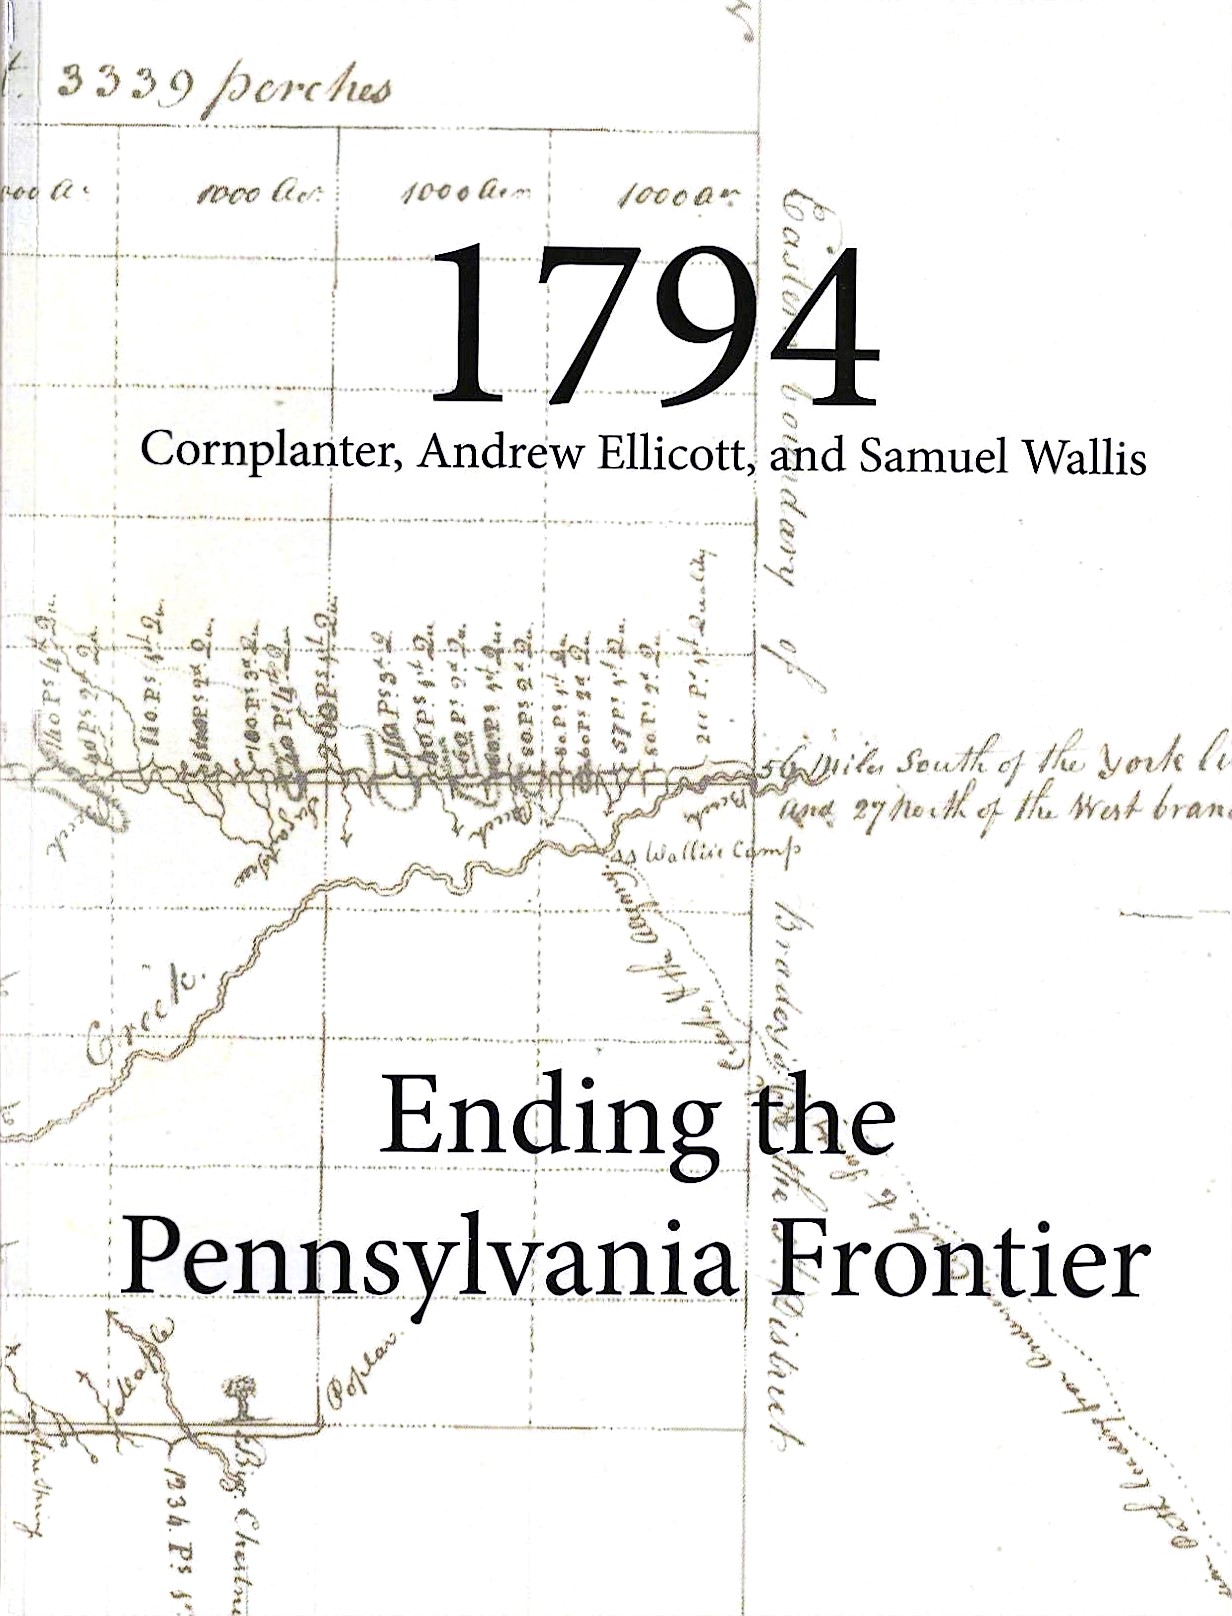 End of Pennsylvania Frontier - 1794,   by John M. Forcey